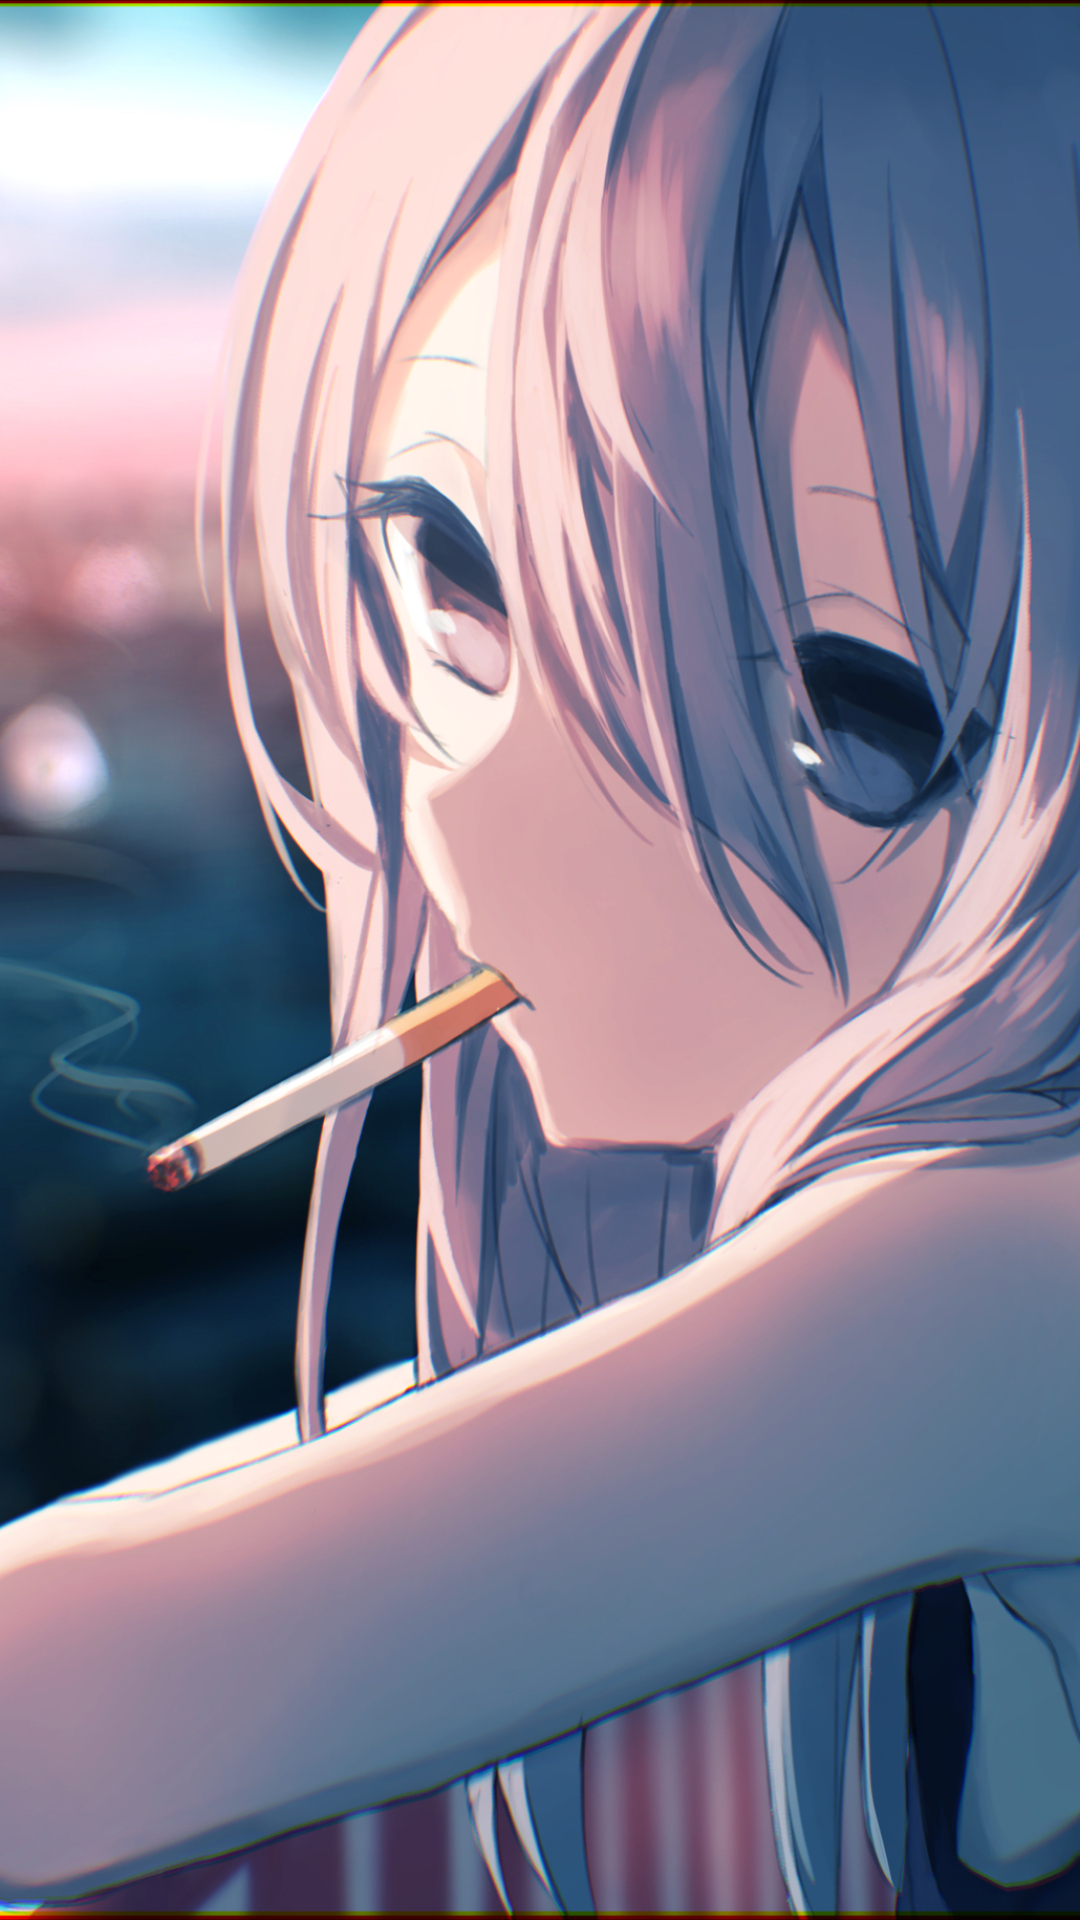 Why Is There Still So Much Smoking In Anime? - Answerman - Anime News  Network-demhanvico.com.vn